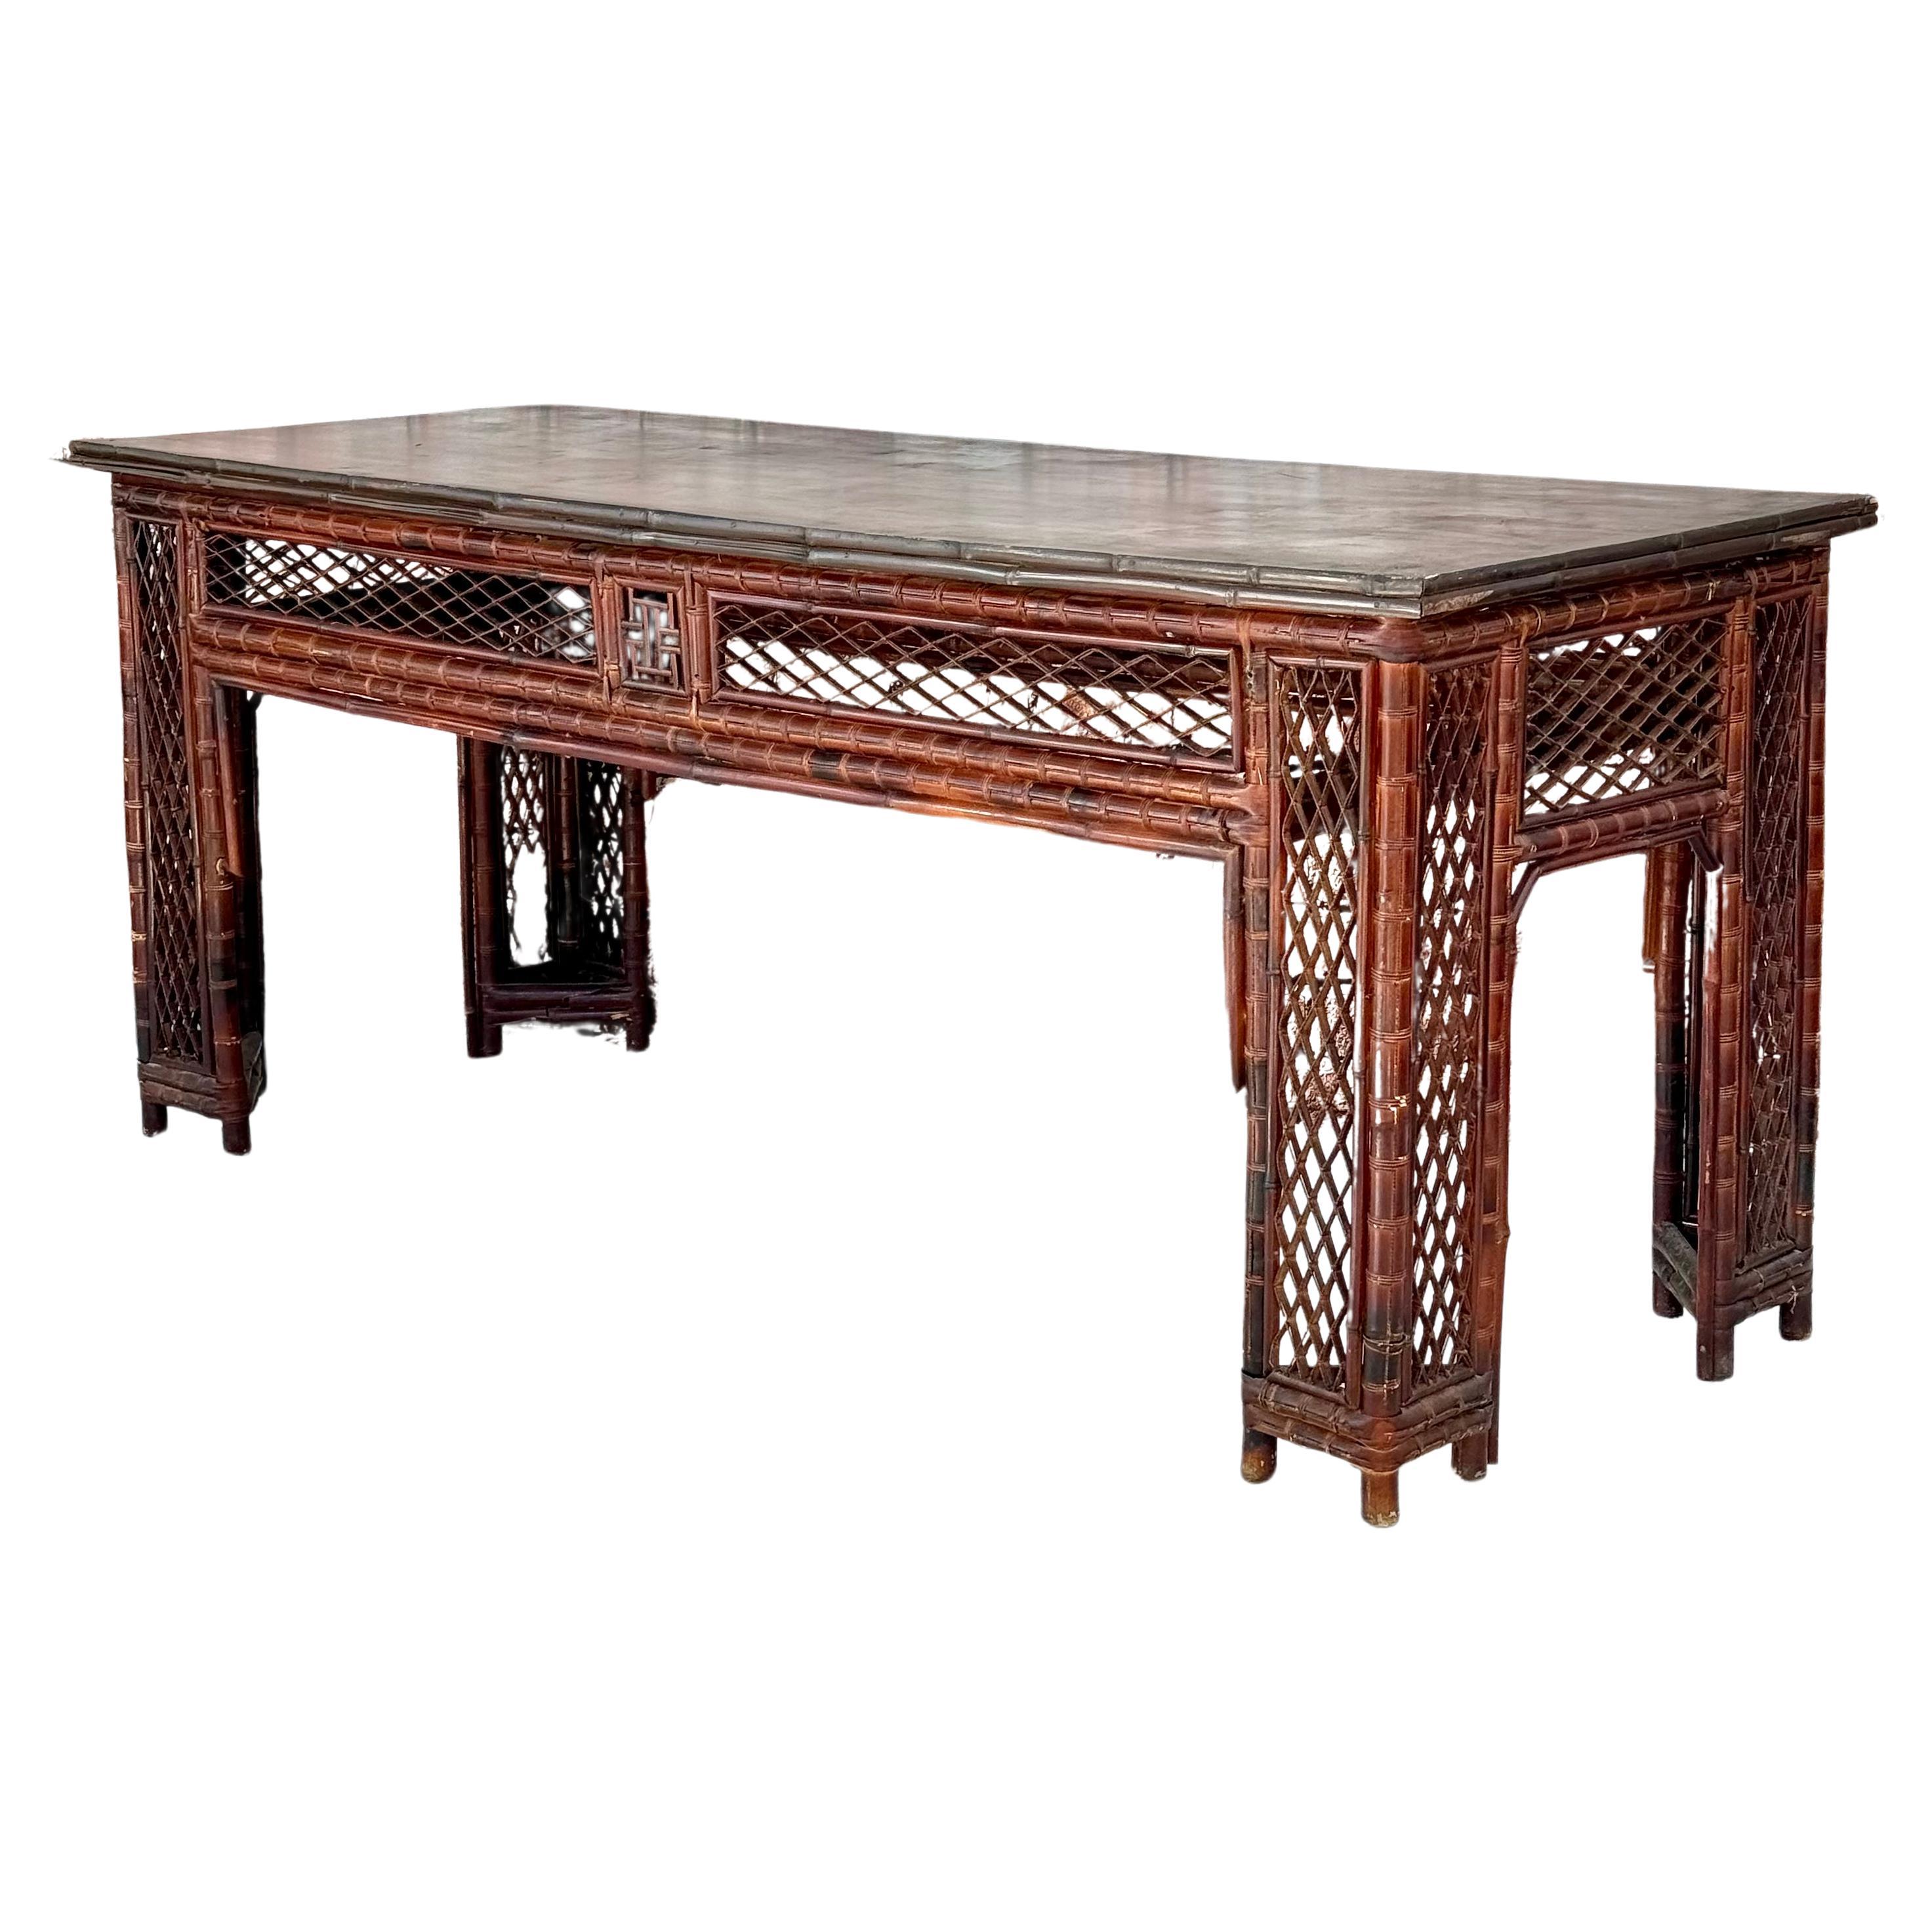  Chinese Export Bamboo Fretwork Library Table For Sale